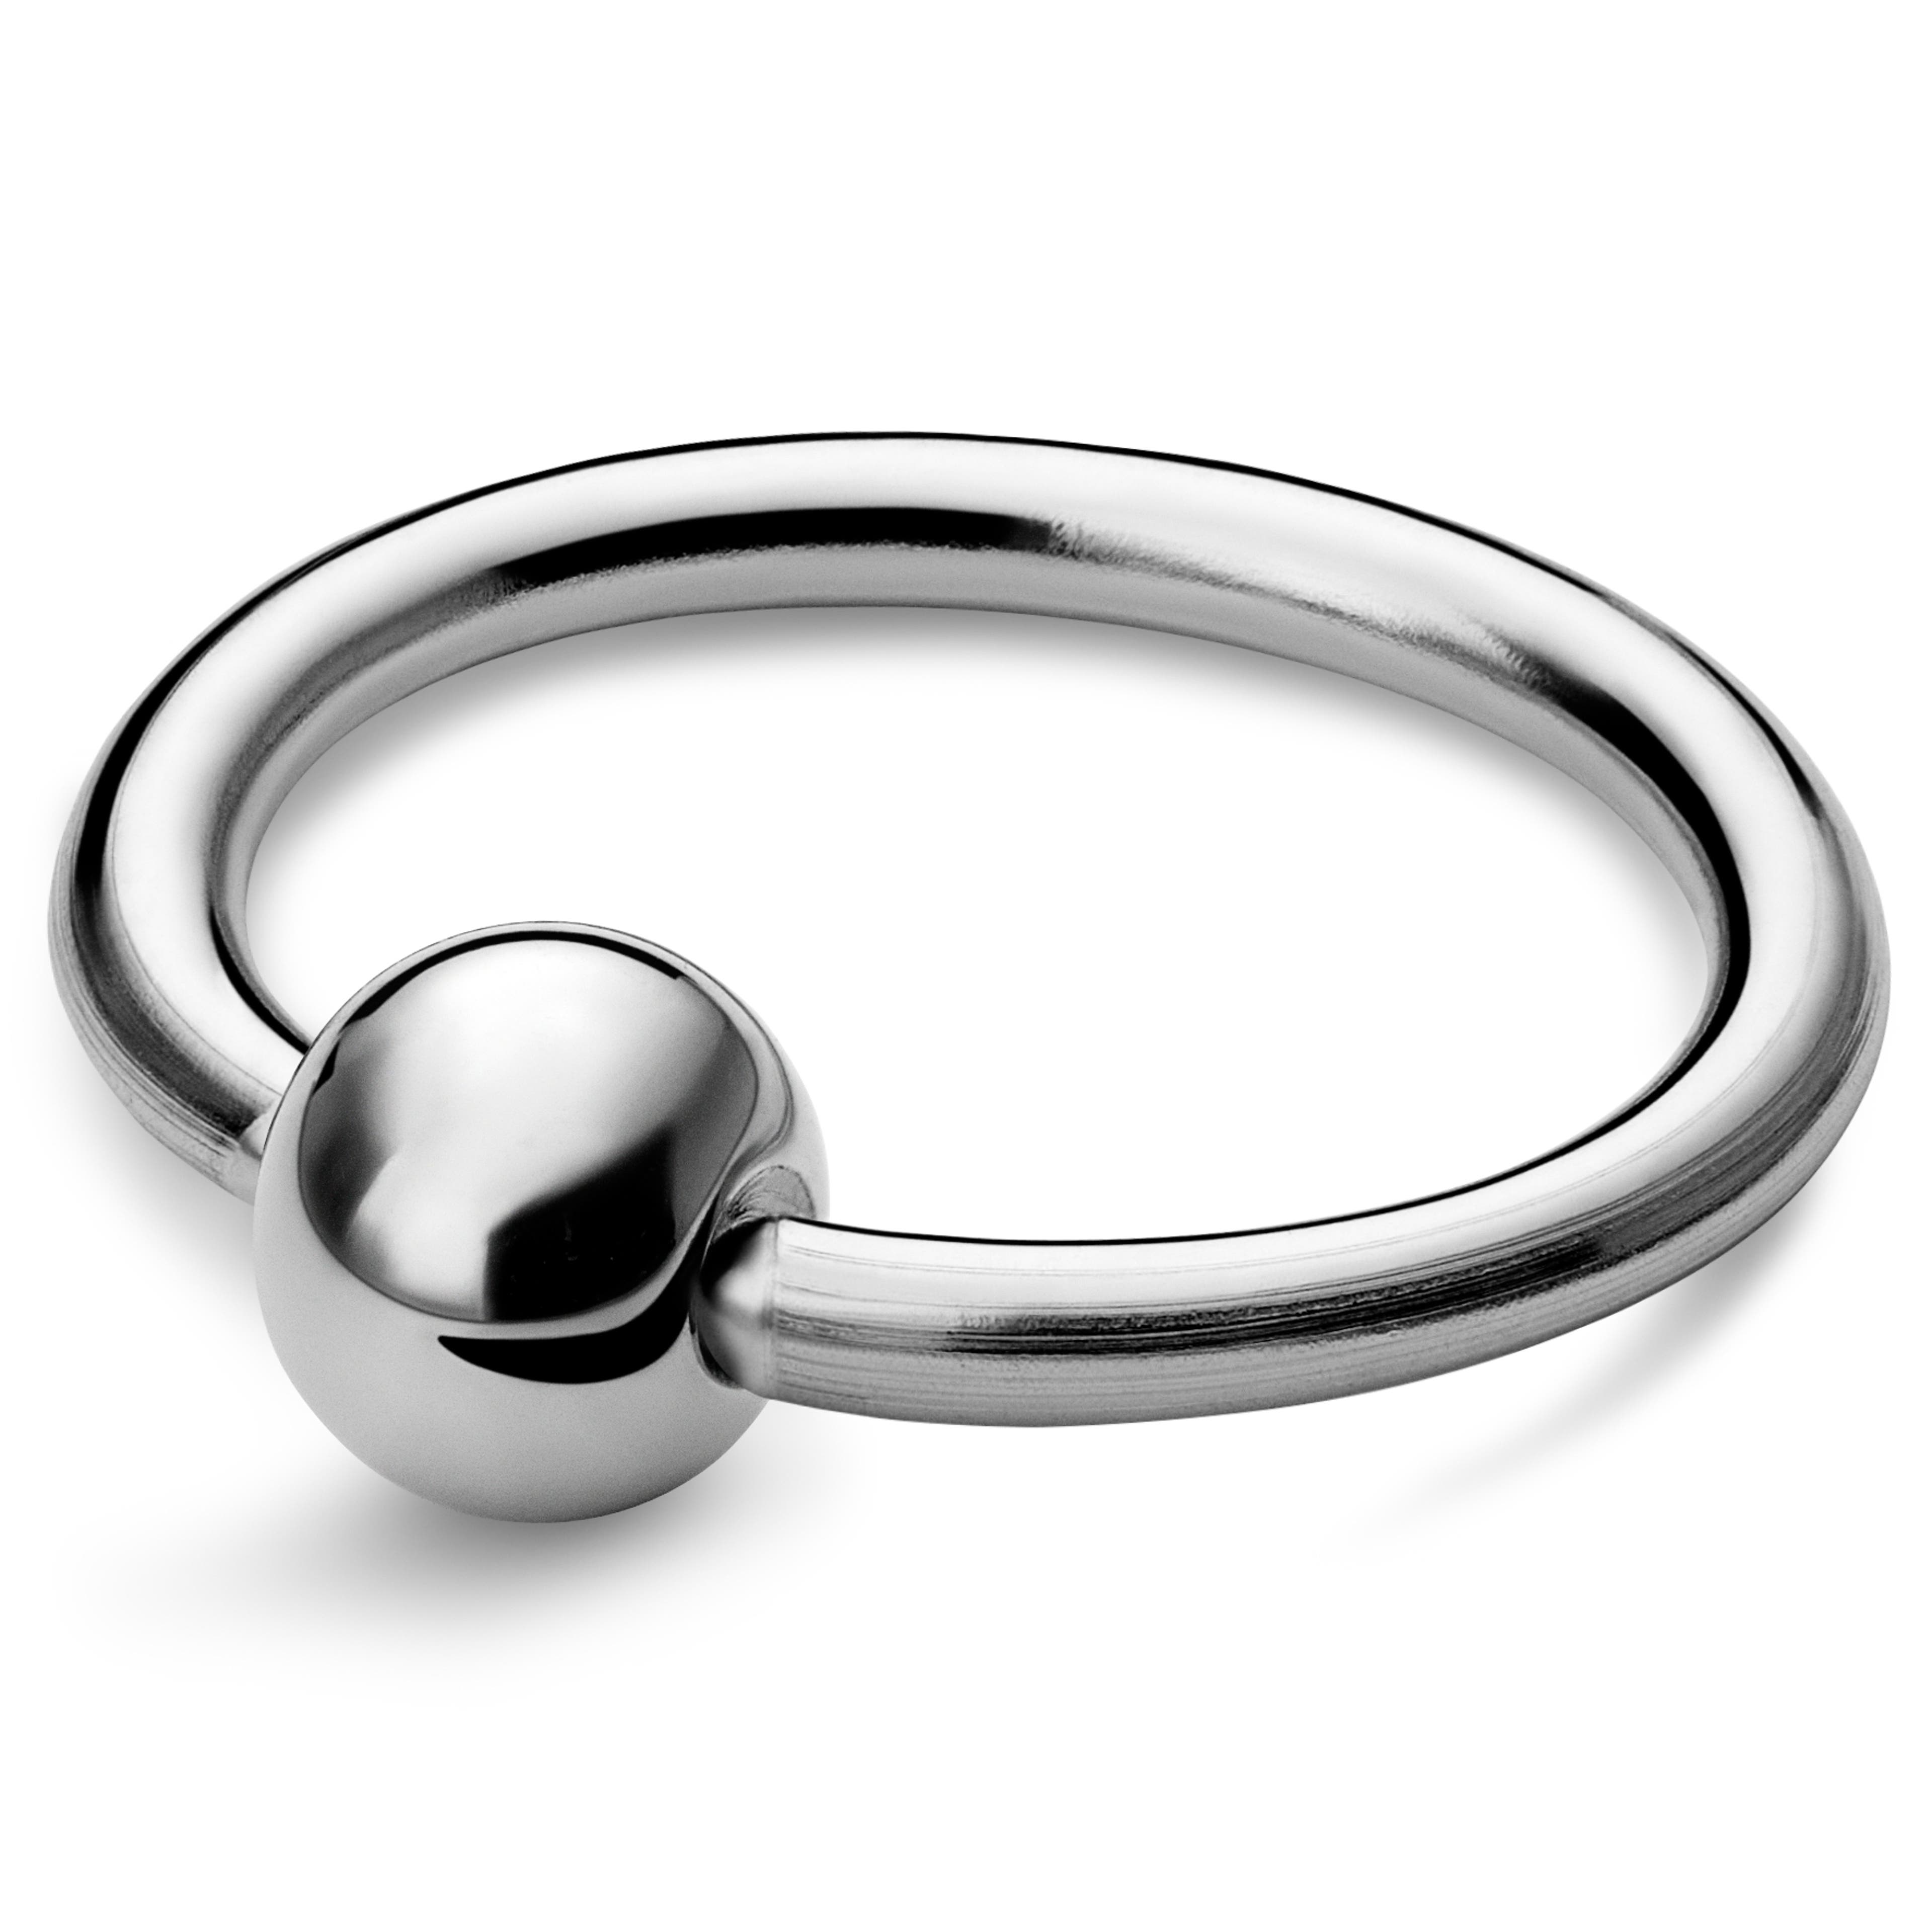 1/3" (8 mm) Silver-Tone Surgical Steel Captive Bead Ring